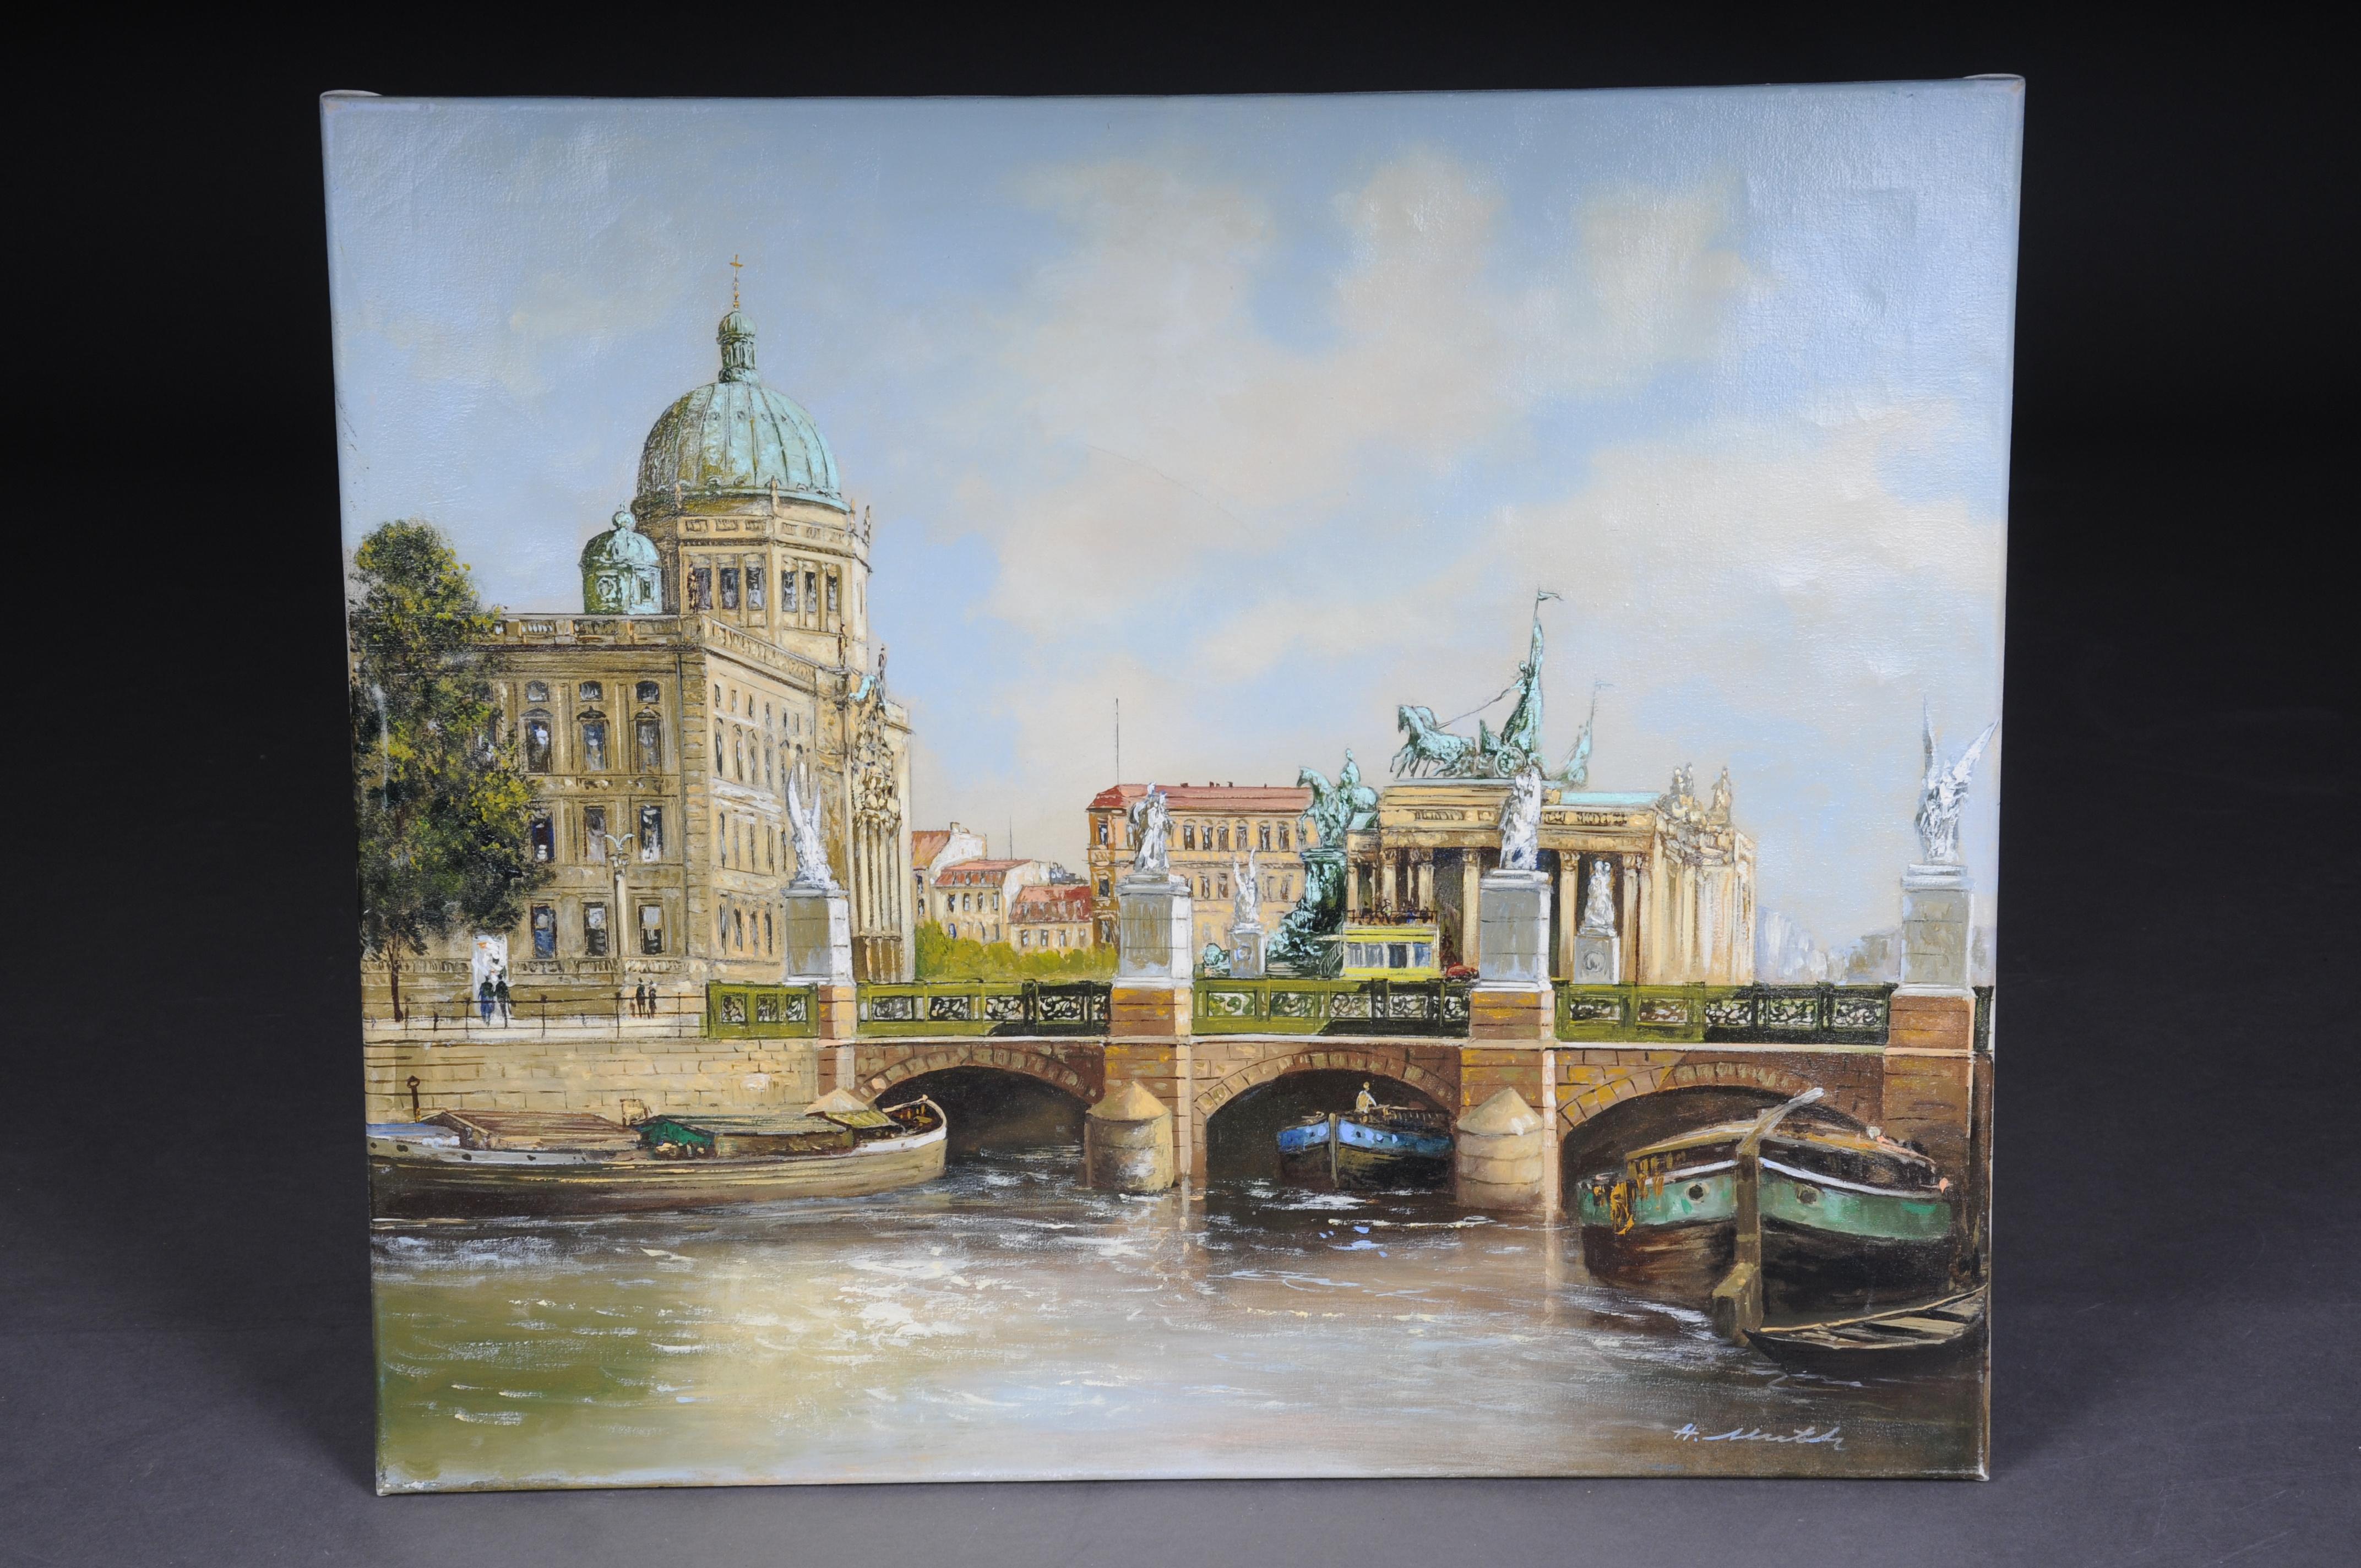 Oil painting by Hermann Muth, Berlin City Palace

Oil on canvas, view of the Berlin City Palace with the pharmacy wing. signed lower right H. Muth.

Hermann Muth (1930-2011) Born on March 22, 1930 in Berlin. His artistic talent was discovered early